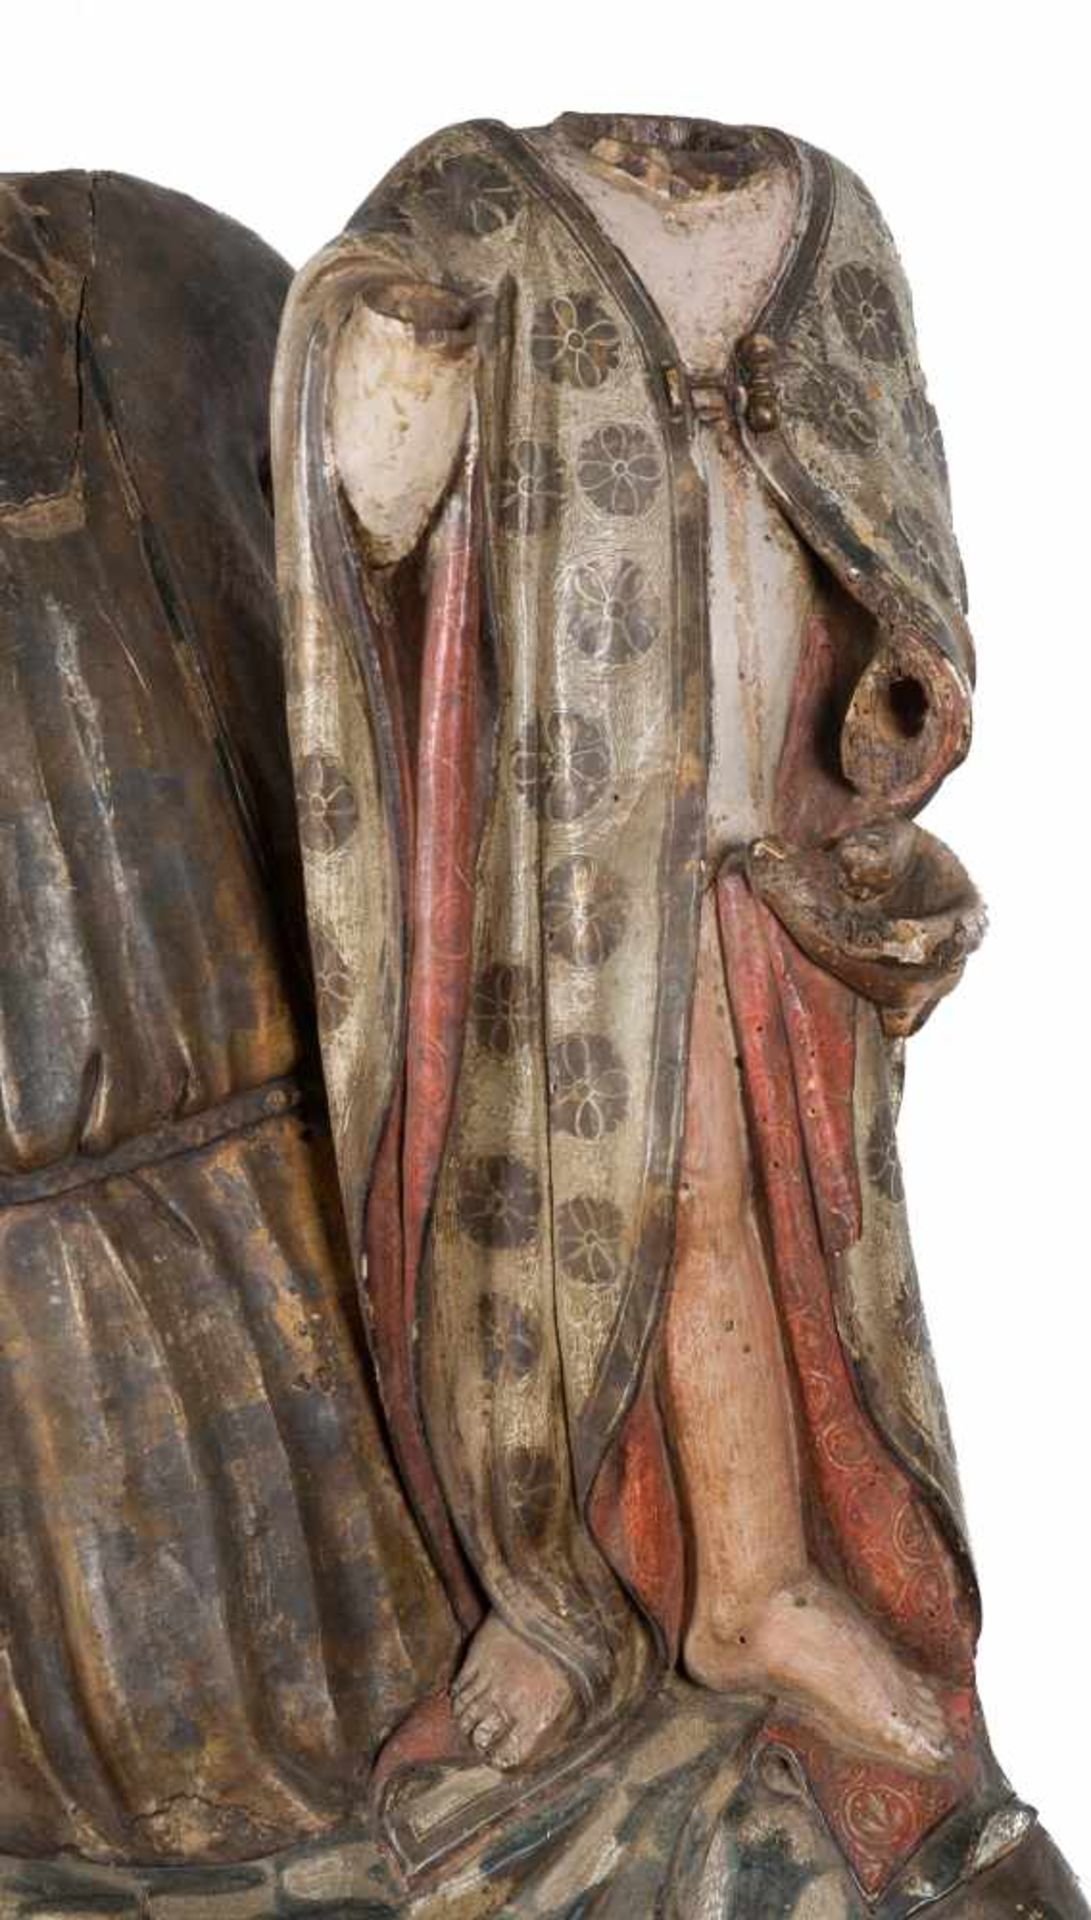 Seat of Wisdom (Sedes Sapientiae). Carved and polychromed wooden sculpture. 14th – 15th century.Seat - Bild 4 aus 5